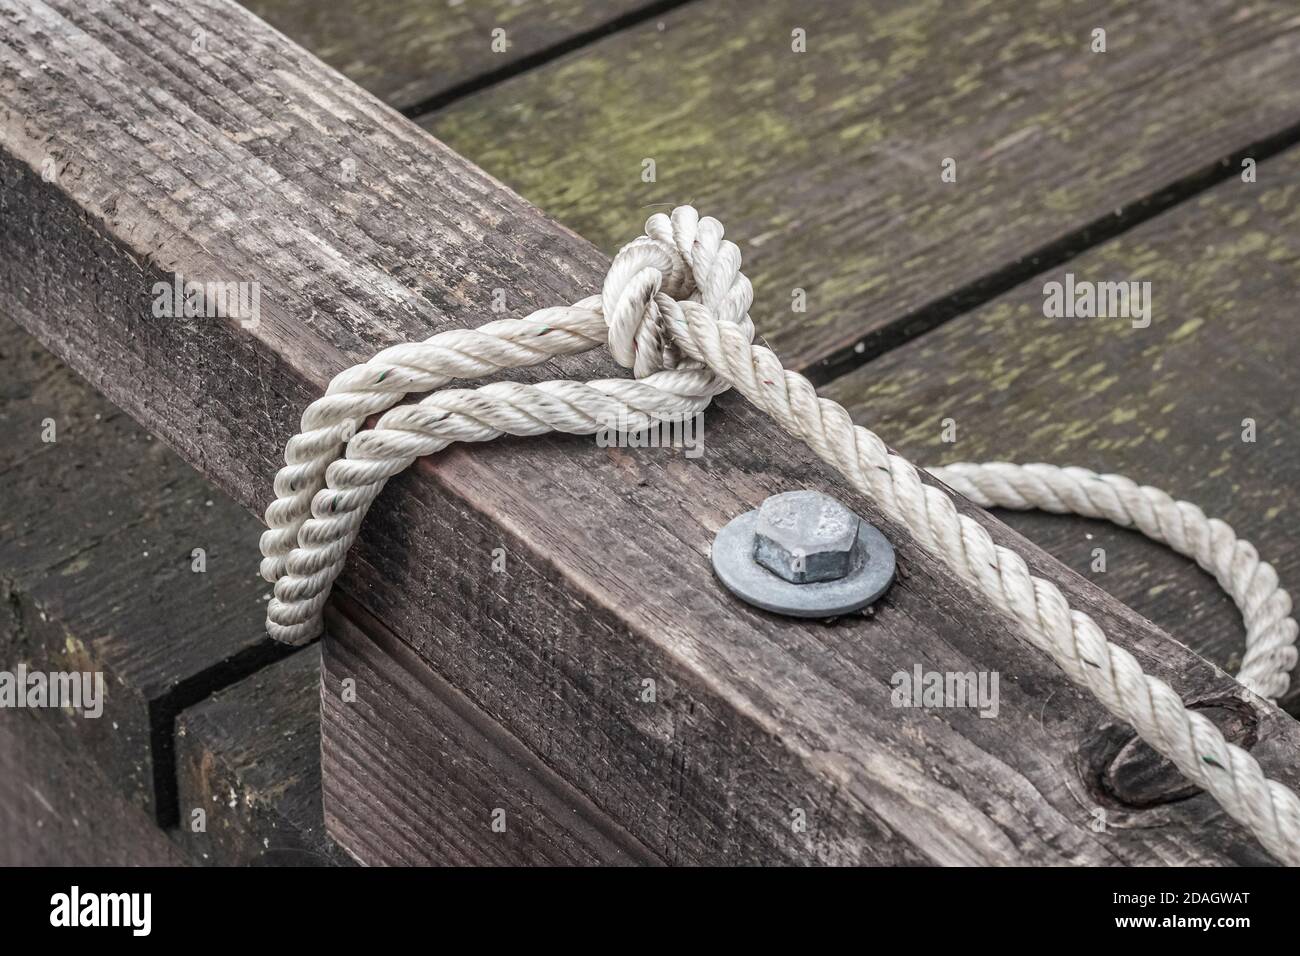 A white three-strand rope, securing a boat, is looped around a bull rail of a brown, weathered wooden dock on Canada's west coast (boat not visible). Stock Photo